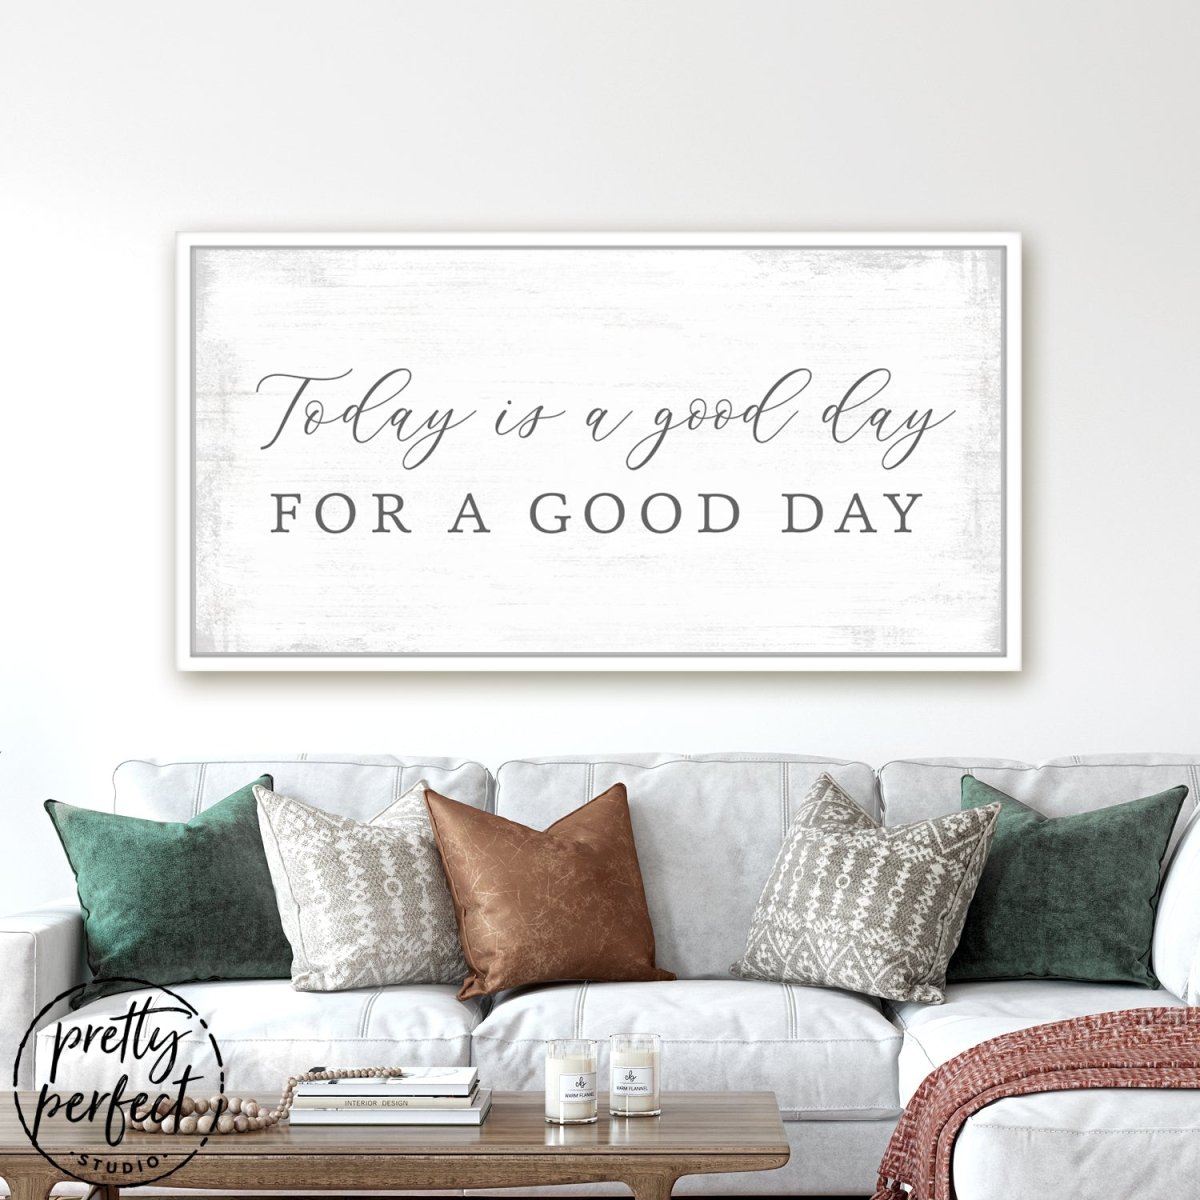 Today Is a Good Day for a Good Day Sign Above Couch in Living Room - Pretty Perfect Studio